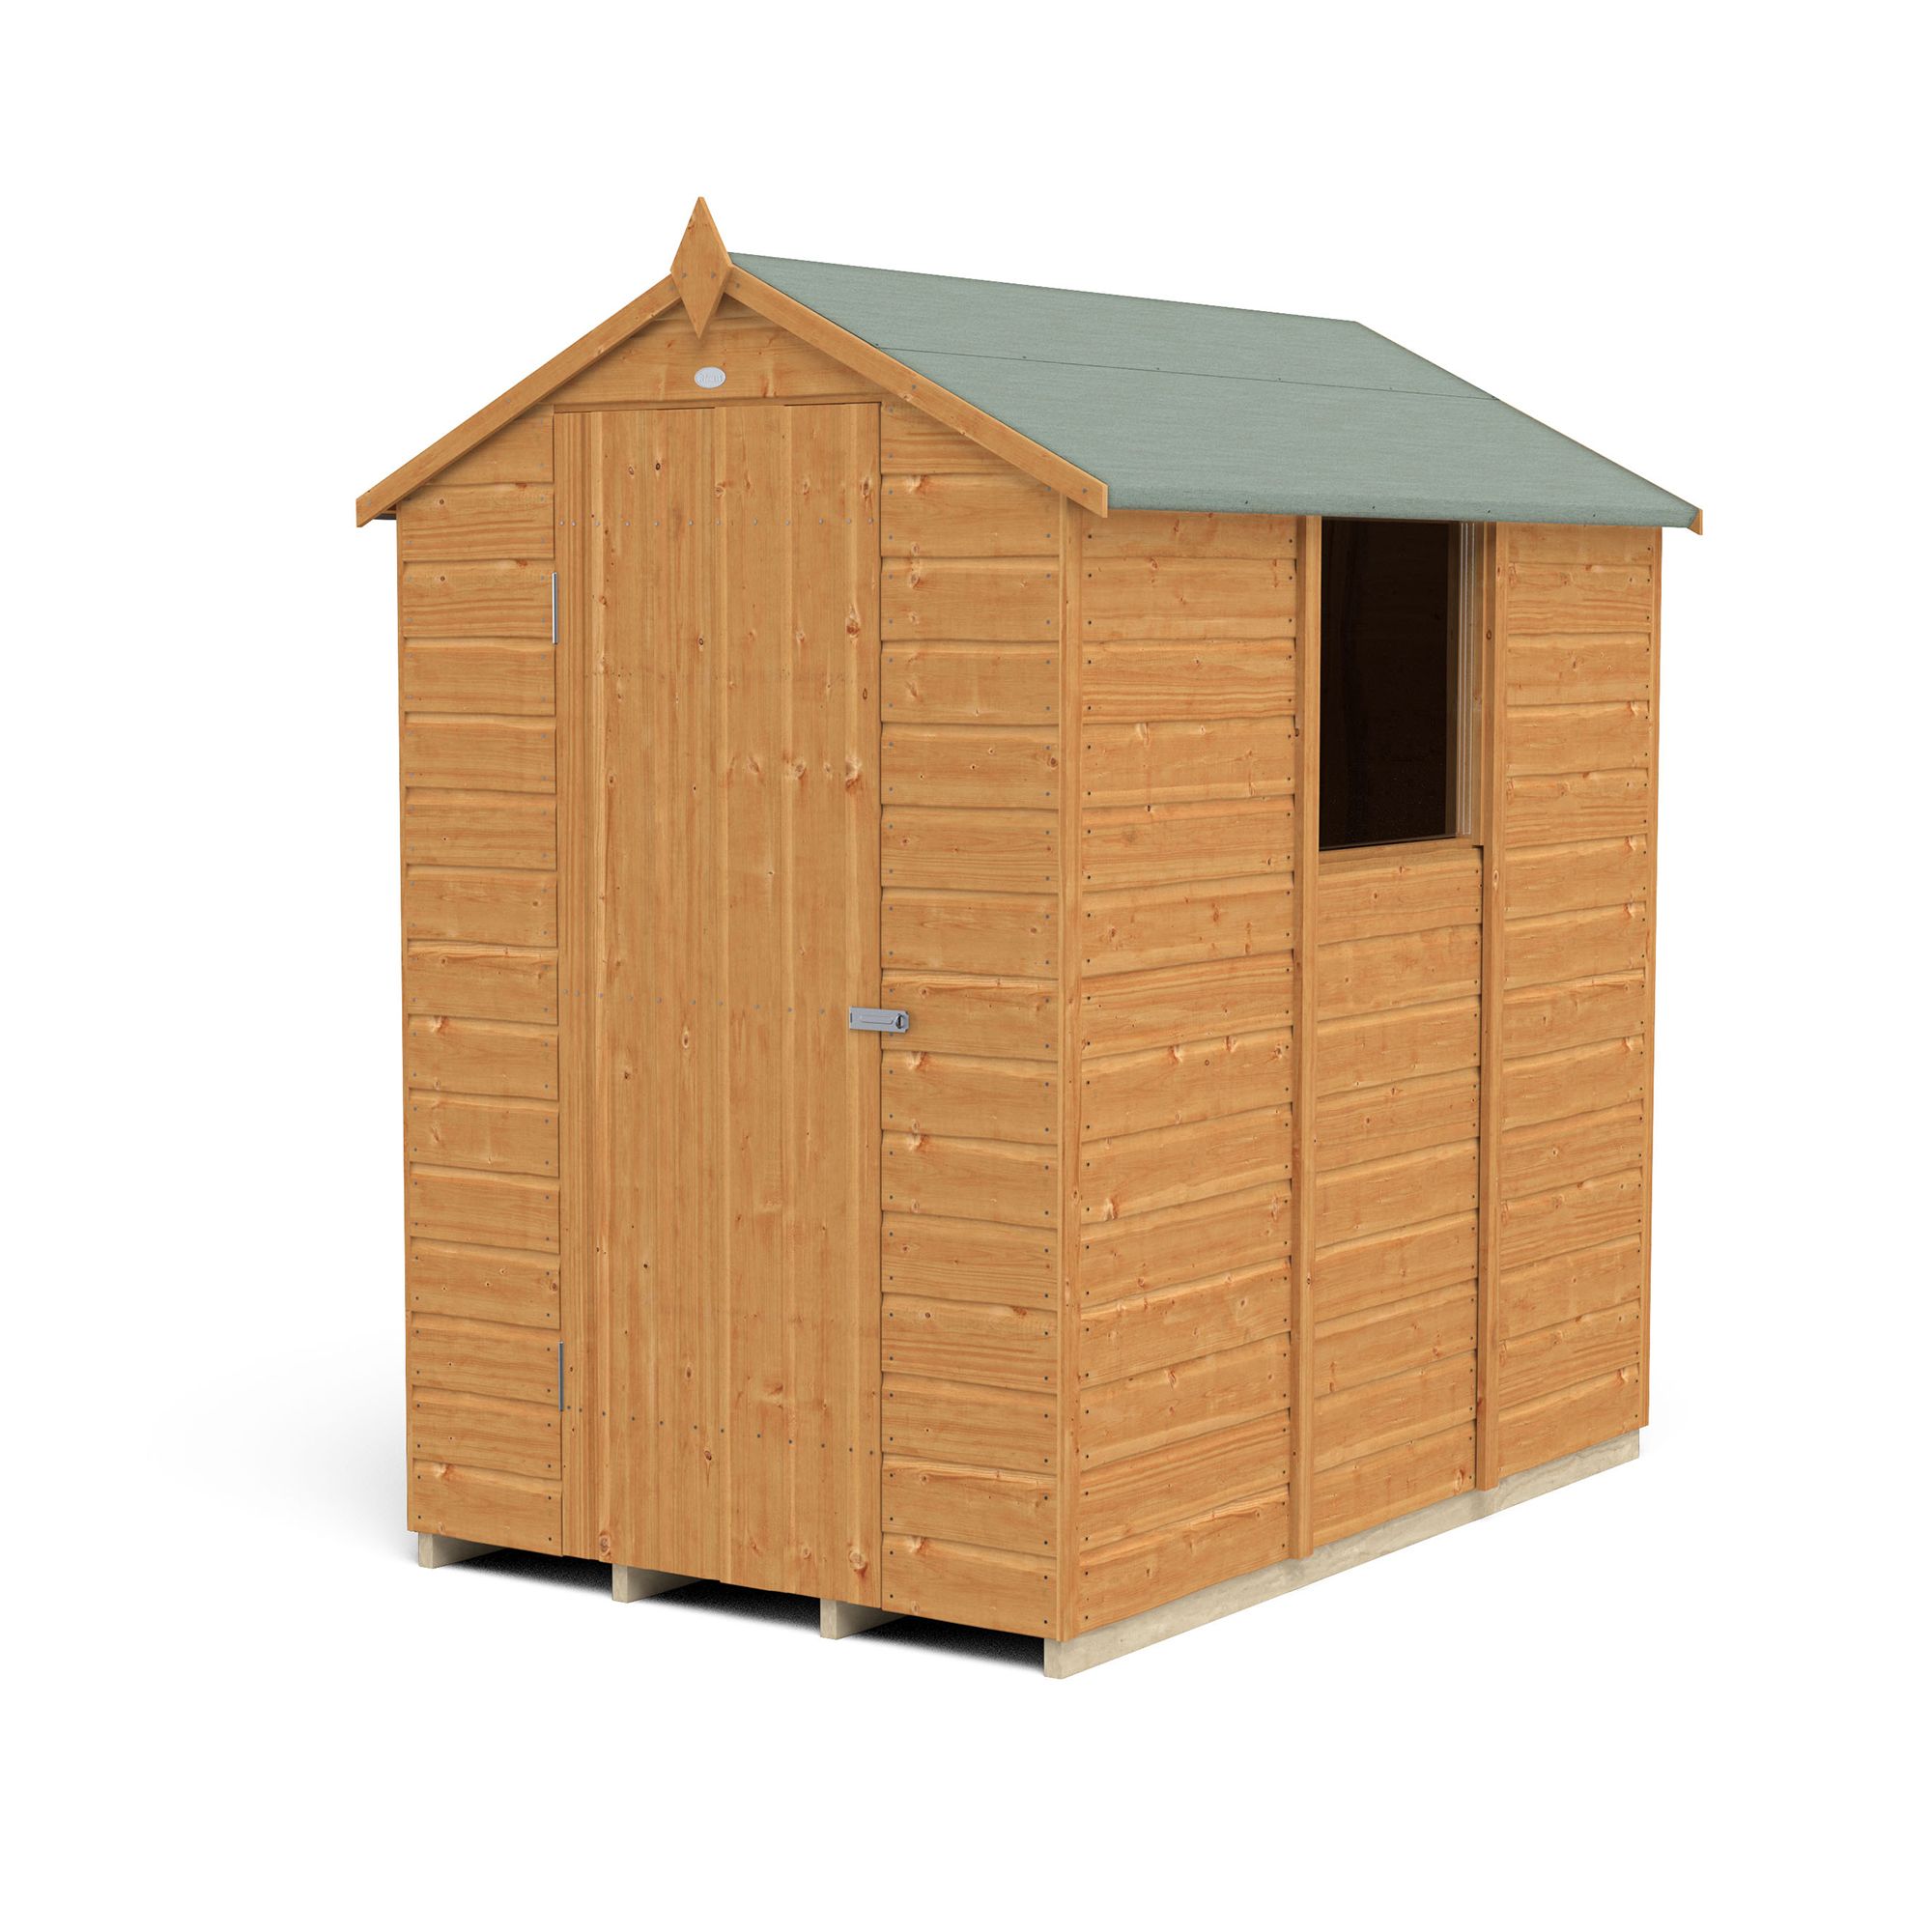 Forest Garden Shiplap 6x4 ft Apex Wooden Dip treated Shed with floor & 1 window (Base included)